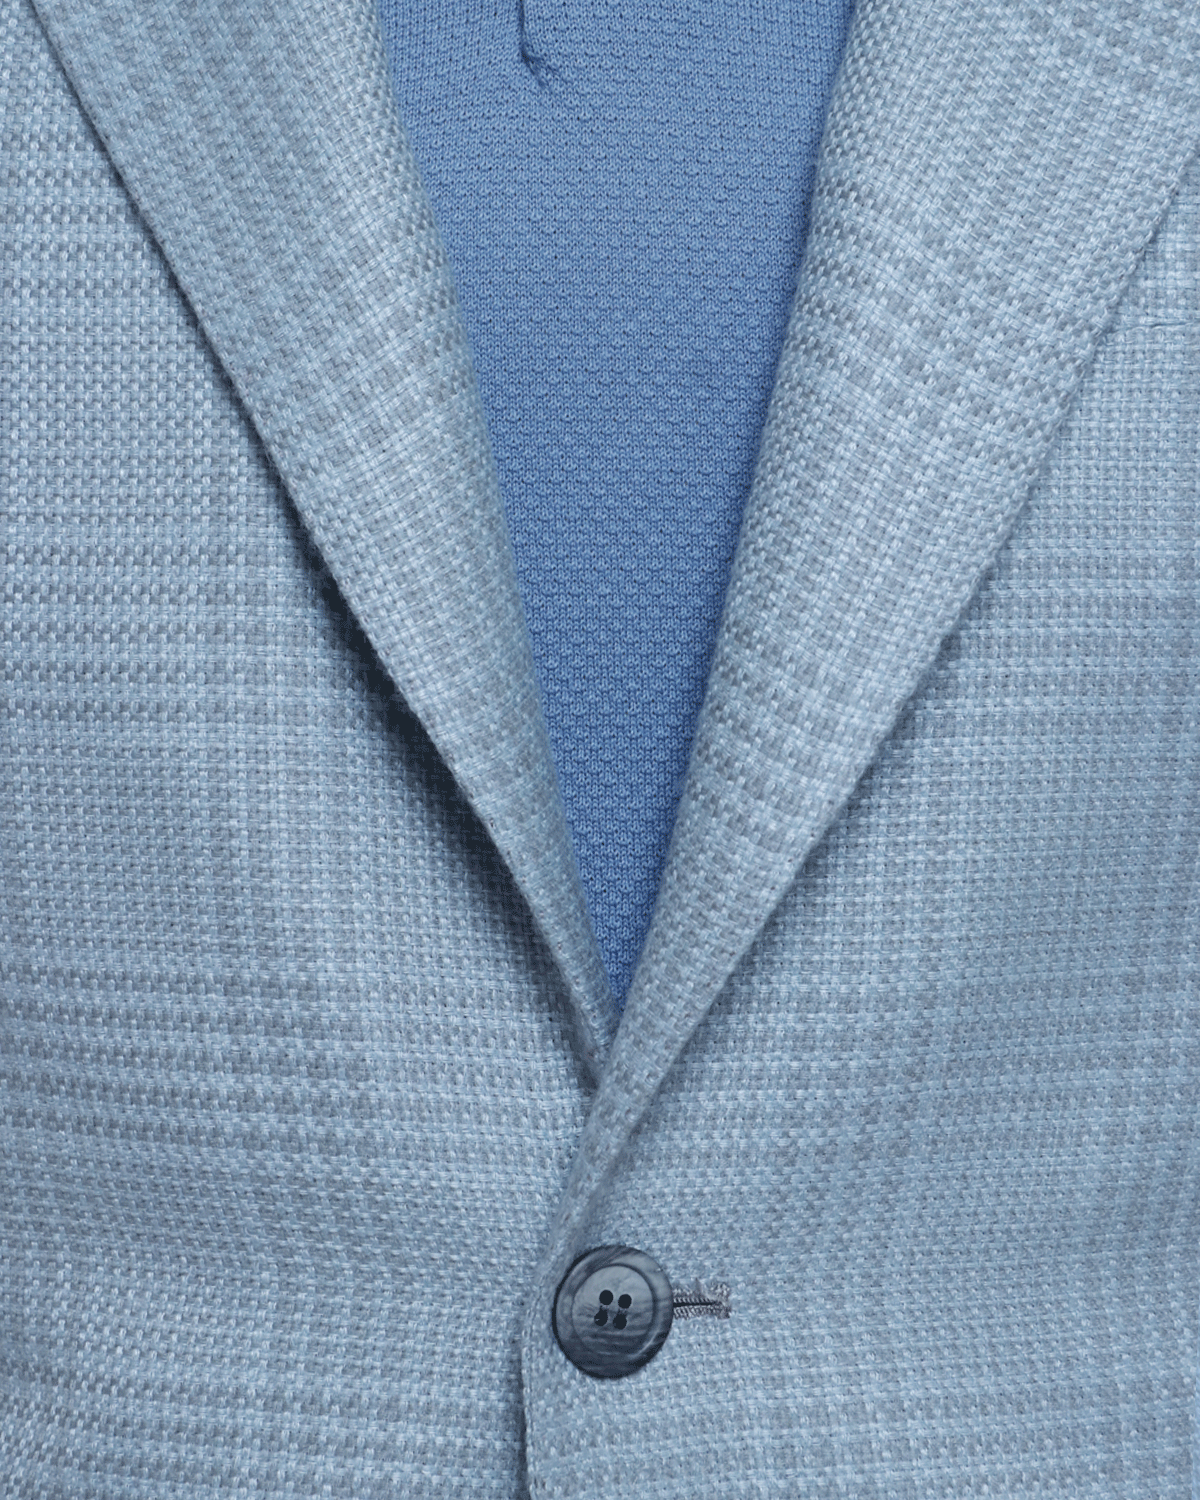 Pearl Grey and Light Blue Cashmere Blend Sportcoat